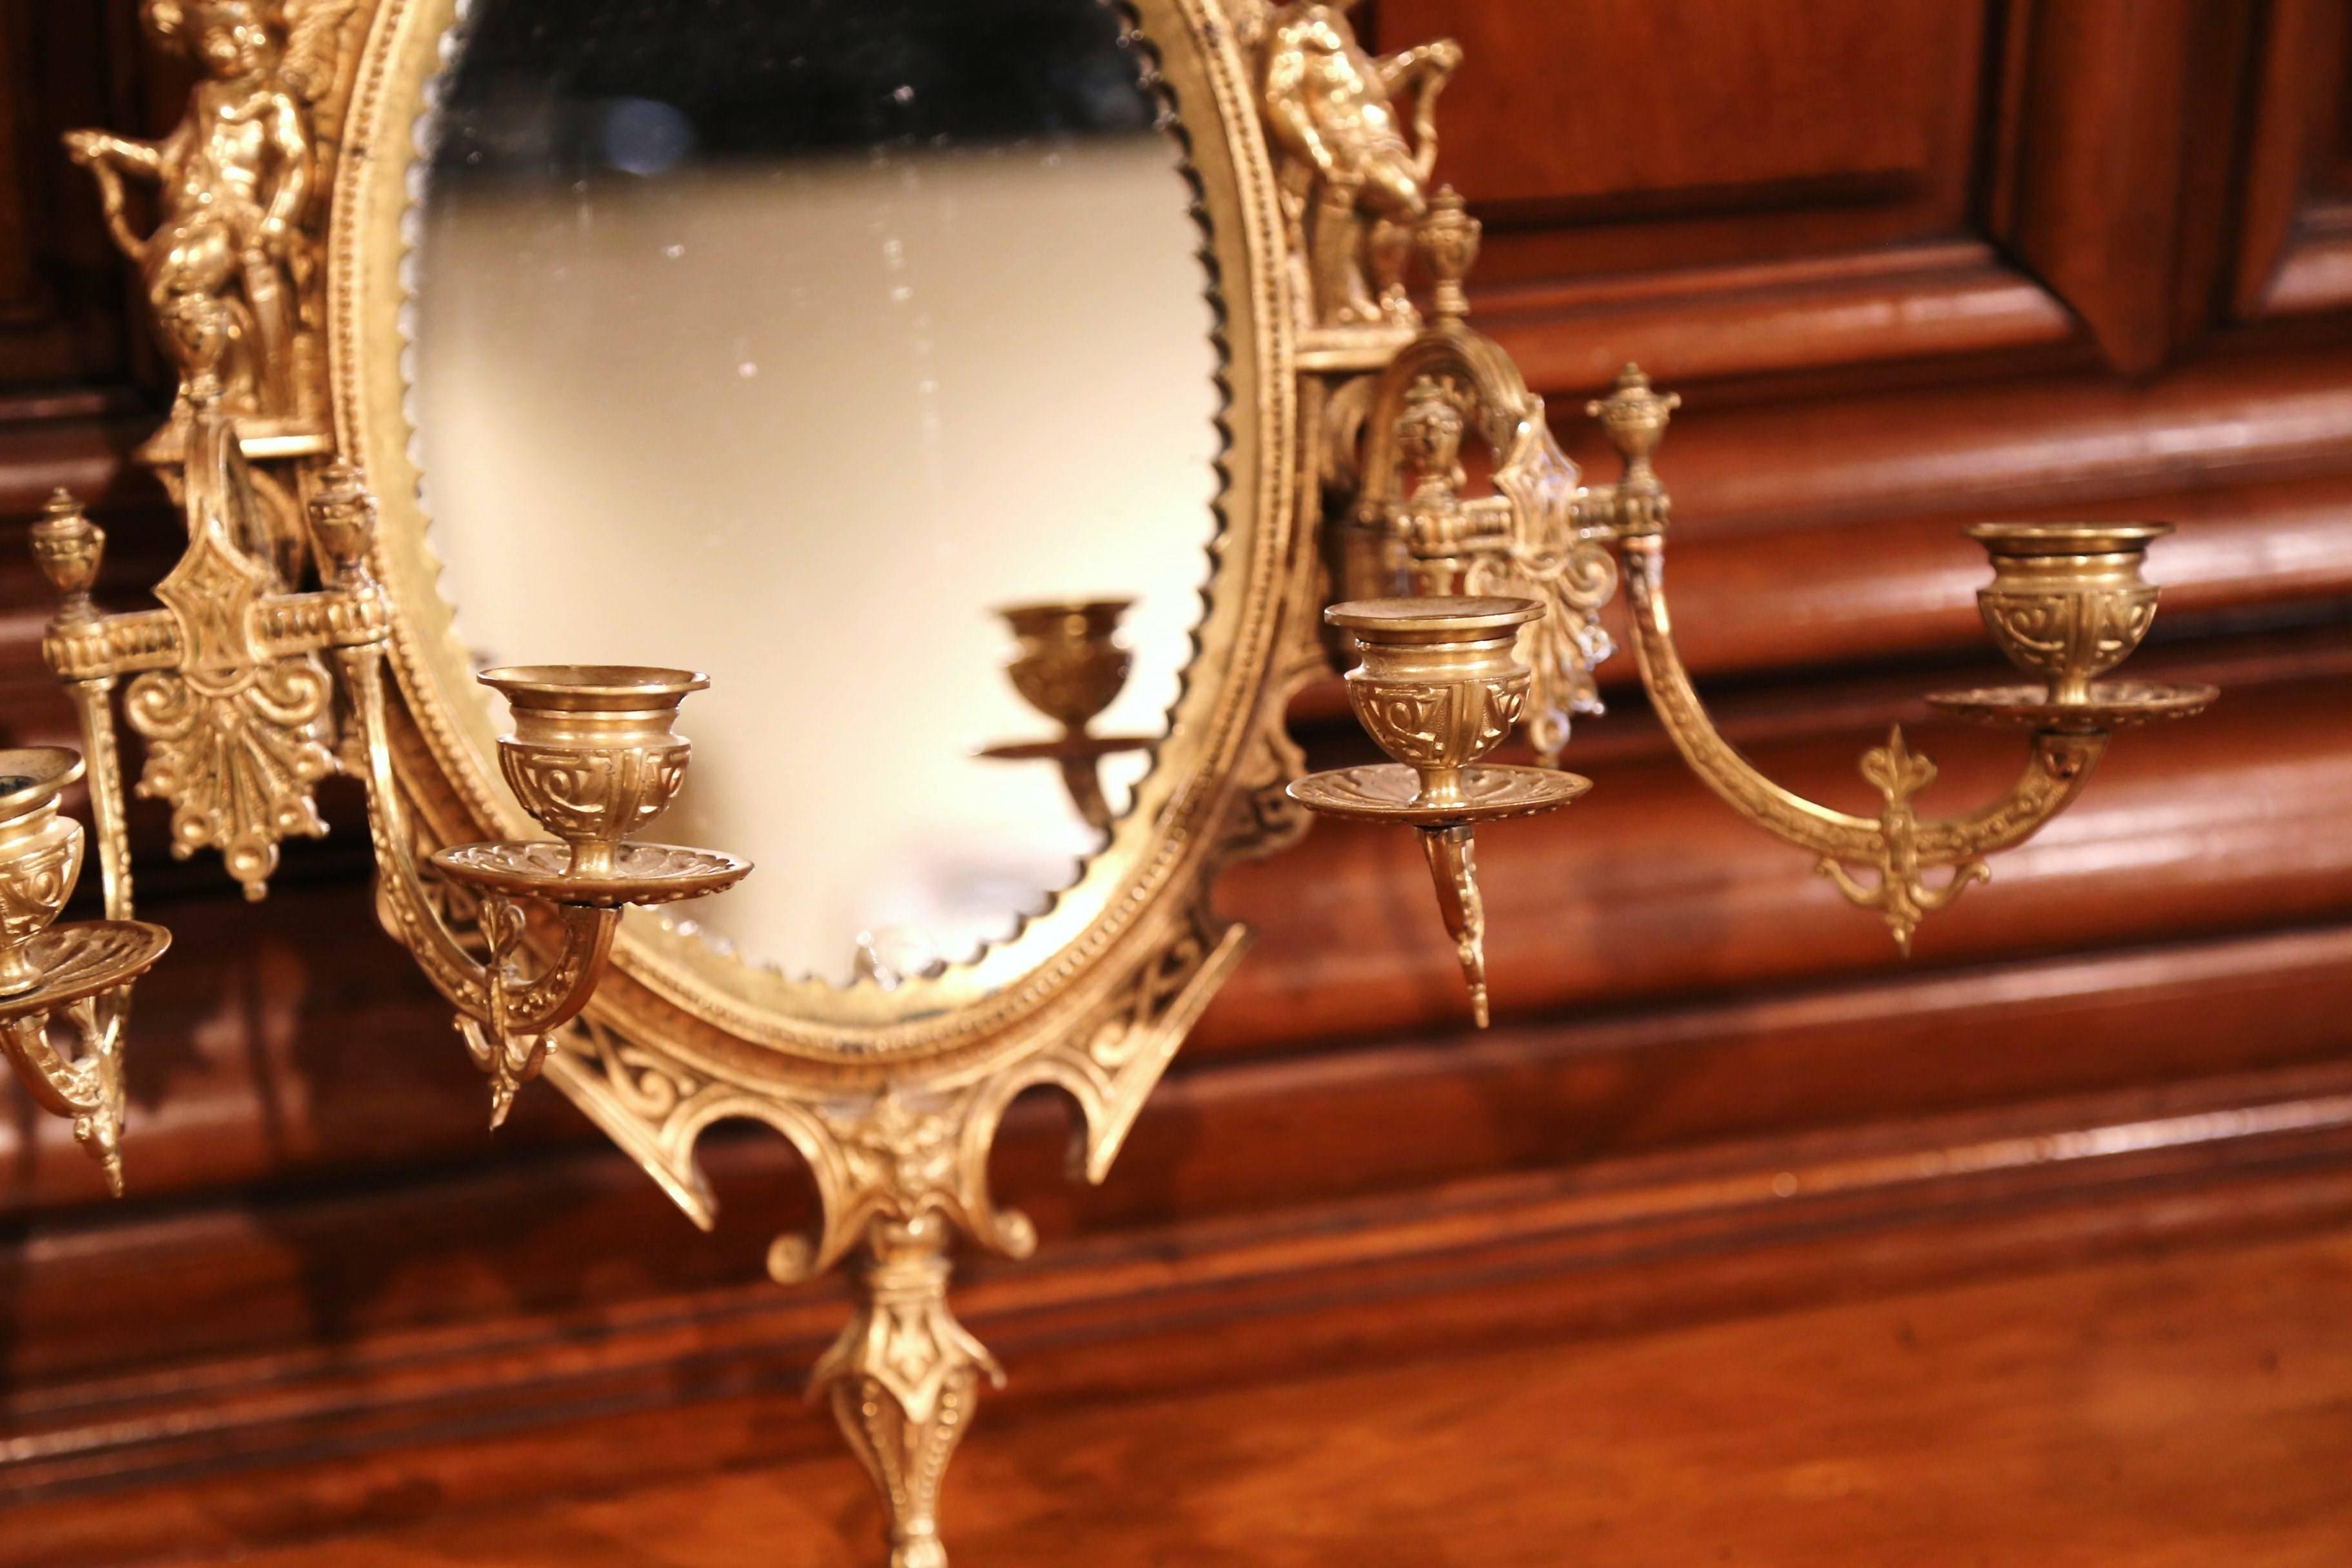 Gilt Large French Bronze Four-Light Sconce with Oval Centre Mirror and Cherub Decor